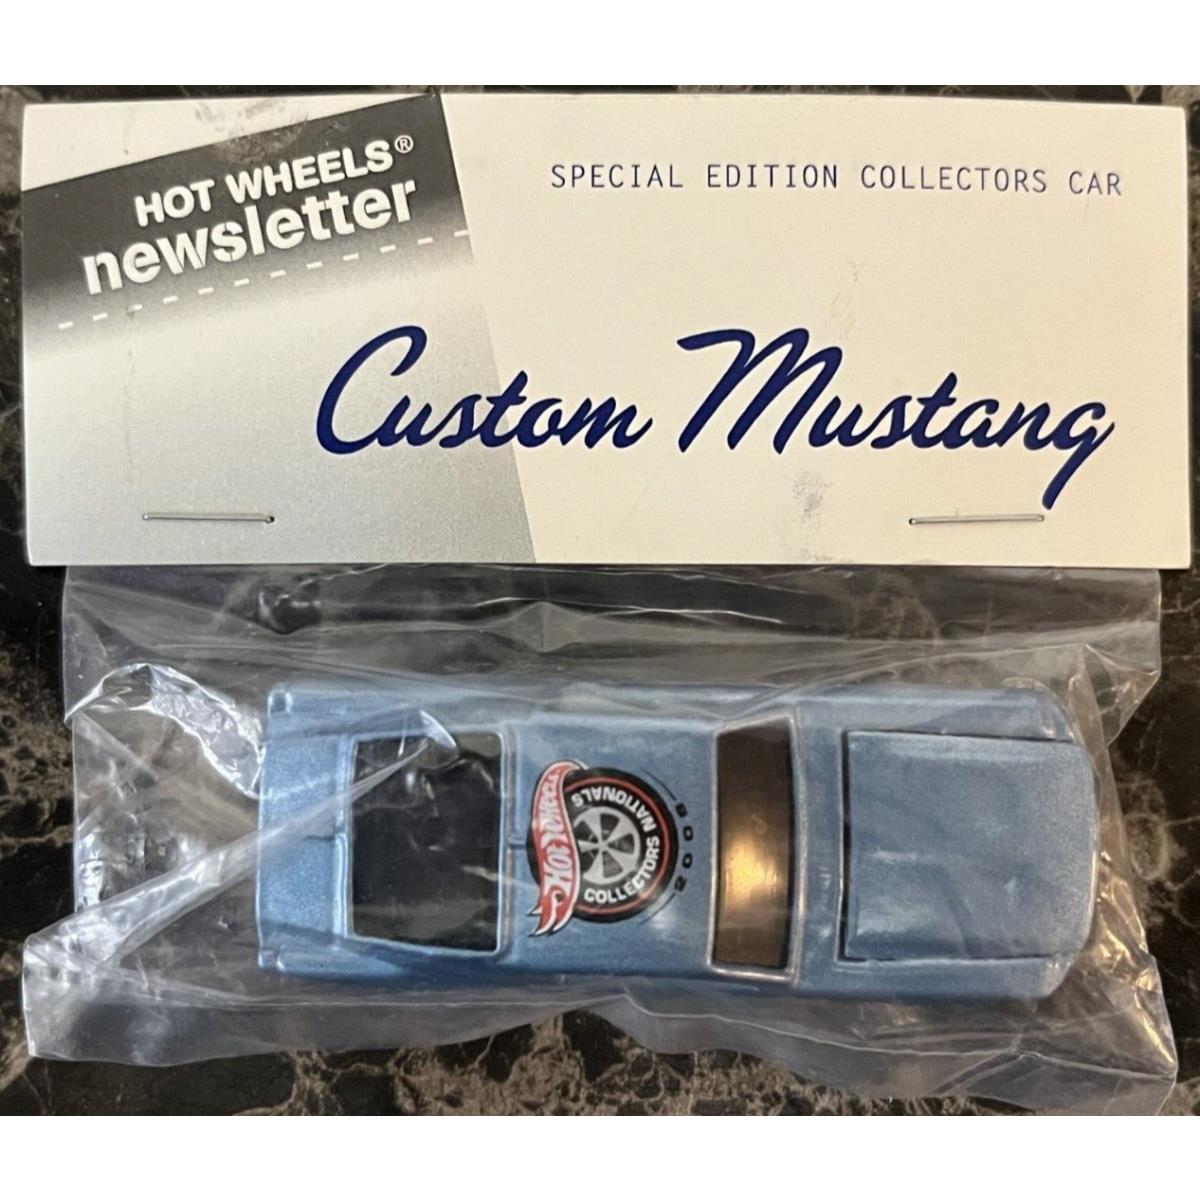 2009 Hot Wheels 9th Annual Collectors Nationals Custom Mustang Newsletter Blue